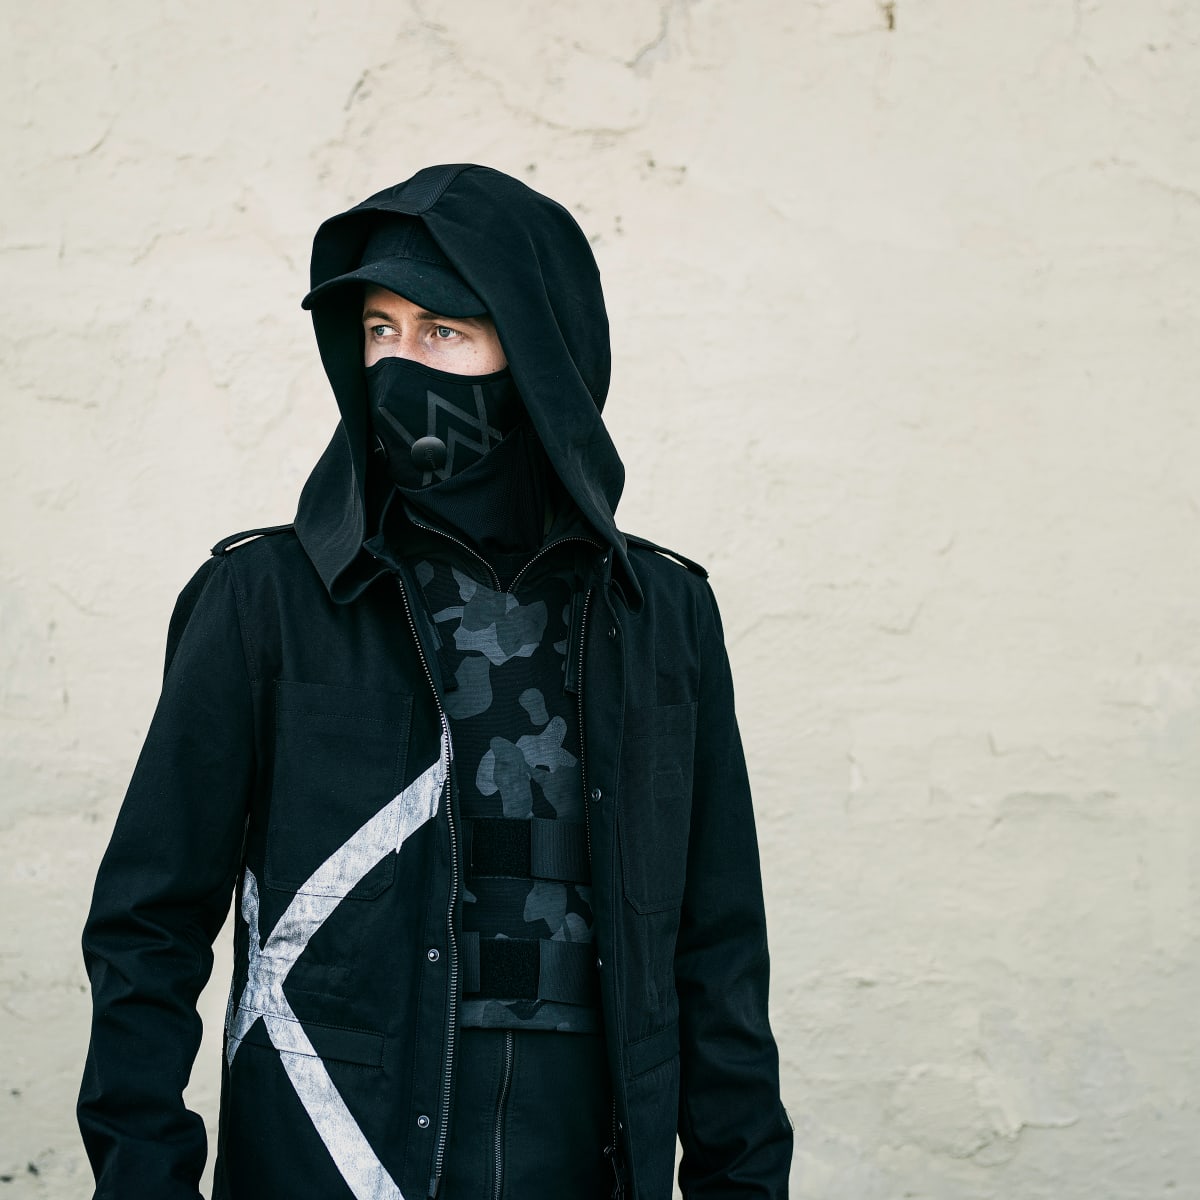 Alan Walker Launches New Gameplay Challenge To Find Next Music Video Edm Com The Latest Electronic Dance Music News Reviews Artists